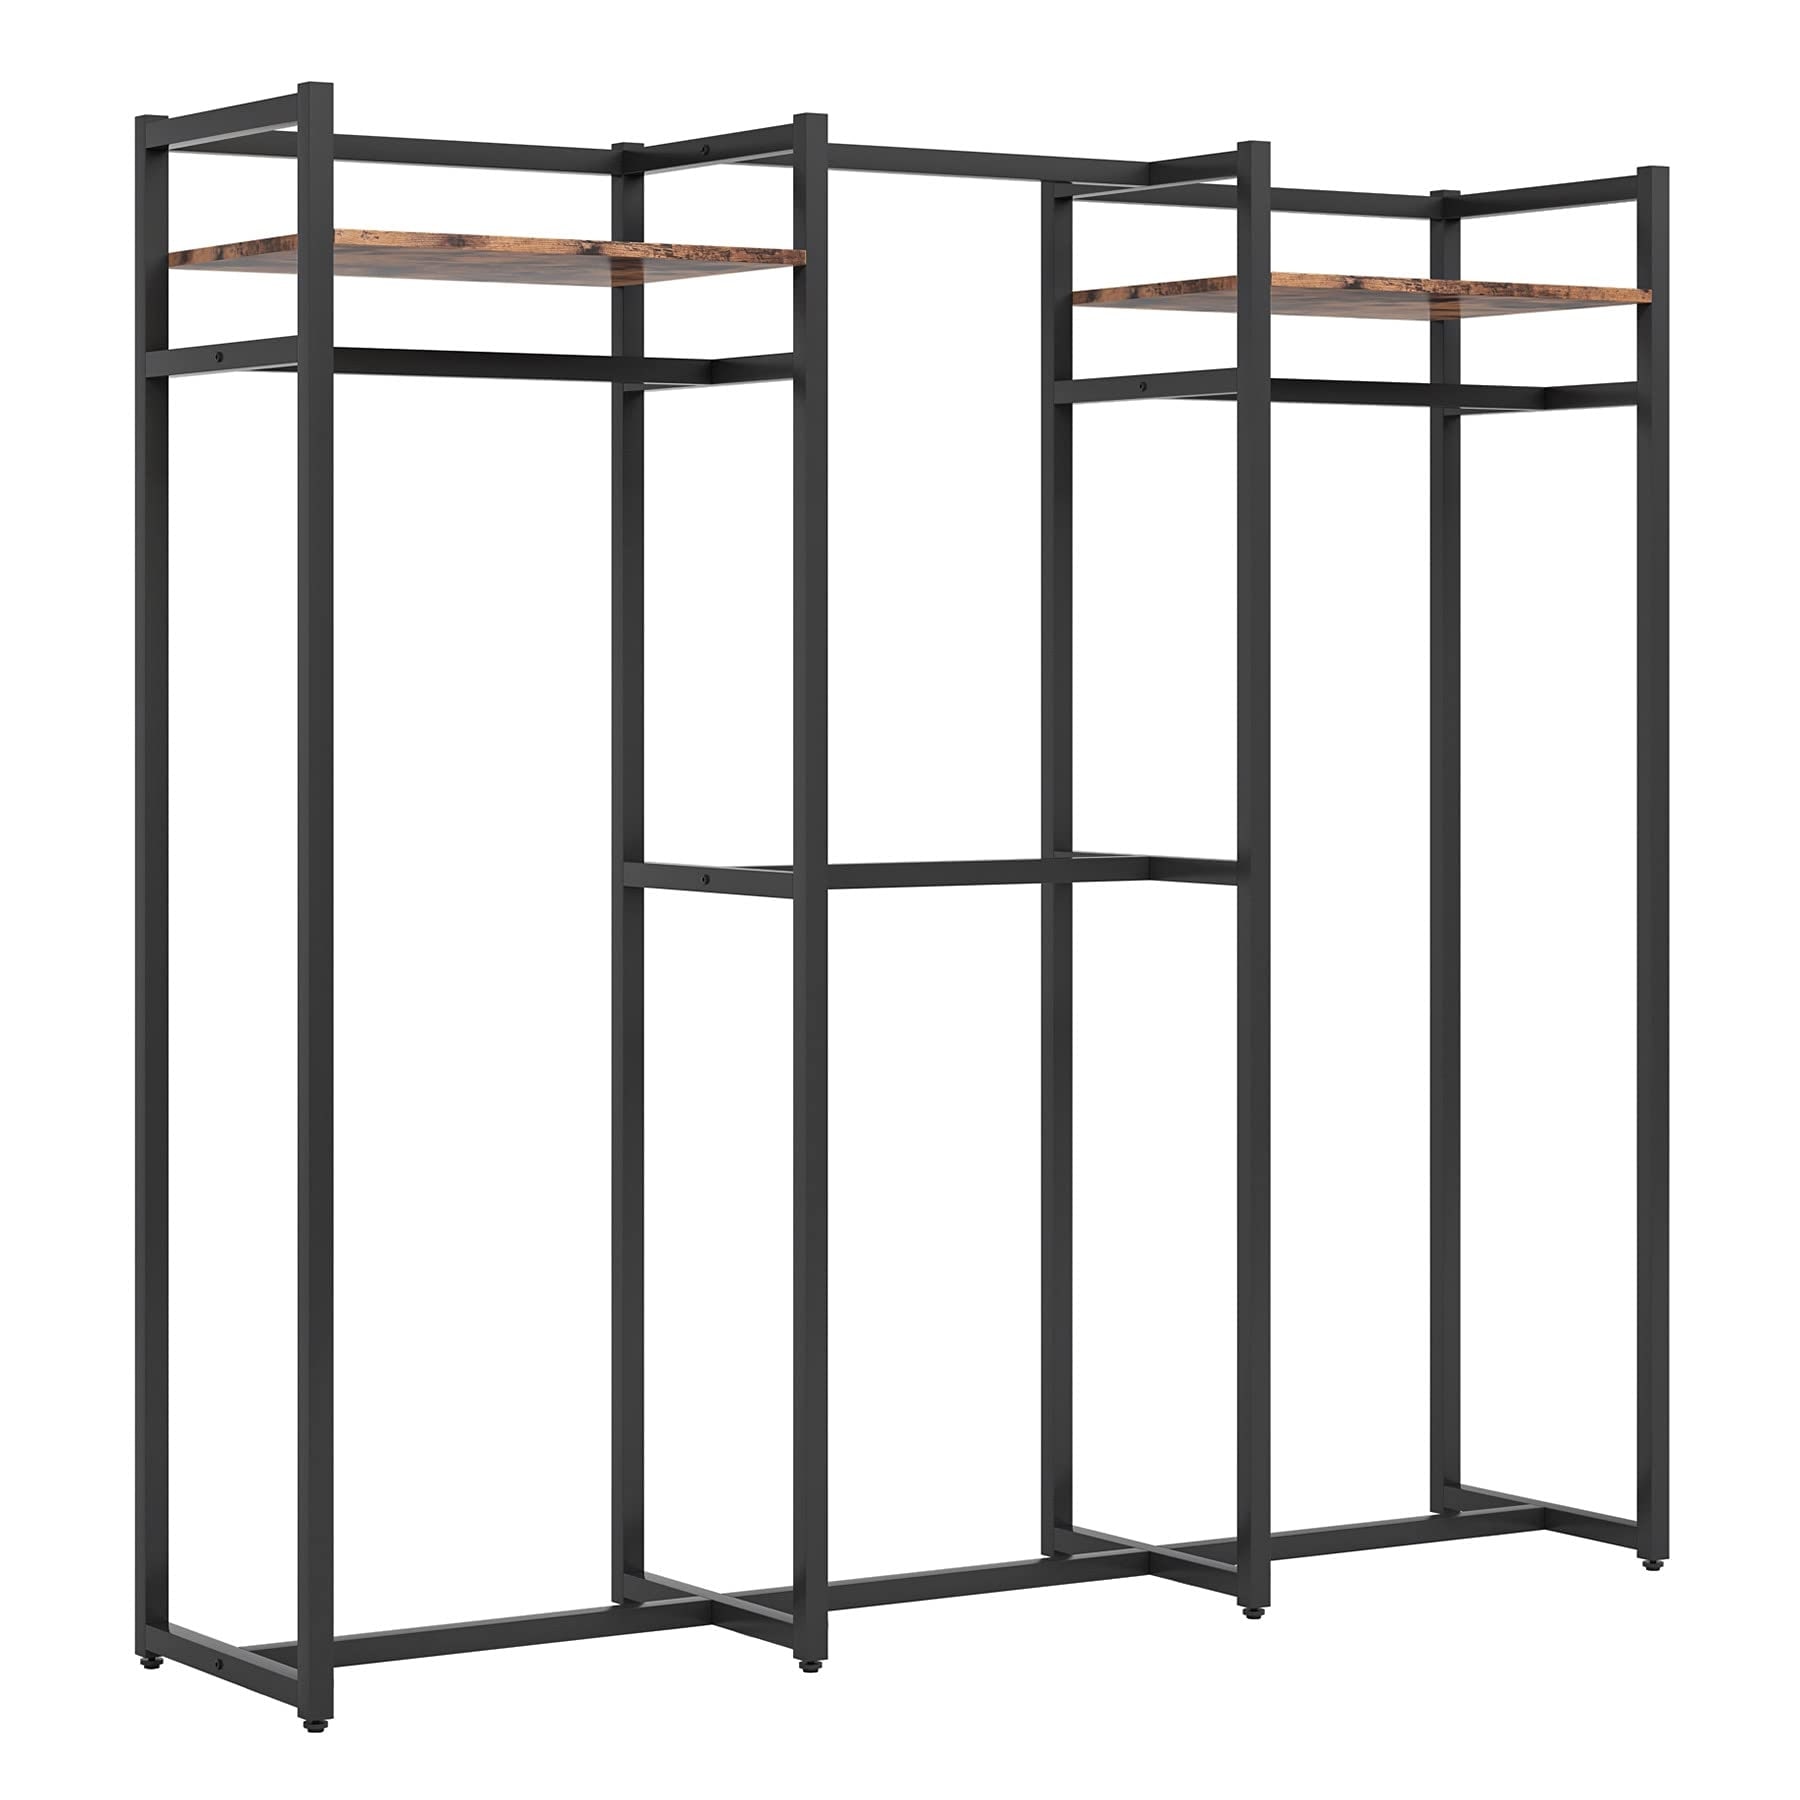 https://ak1.ostkcdn.com/images/products/is/images/direct/b06d9531991f6e065495ab56dfaf45c7db82e5f7/Garment-Rack-Heavy-Duty-Clothes-Rack-Free-Standing-Closet-Organizer-with-Shelves-and-4-hanging-Rods.jpg